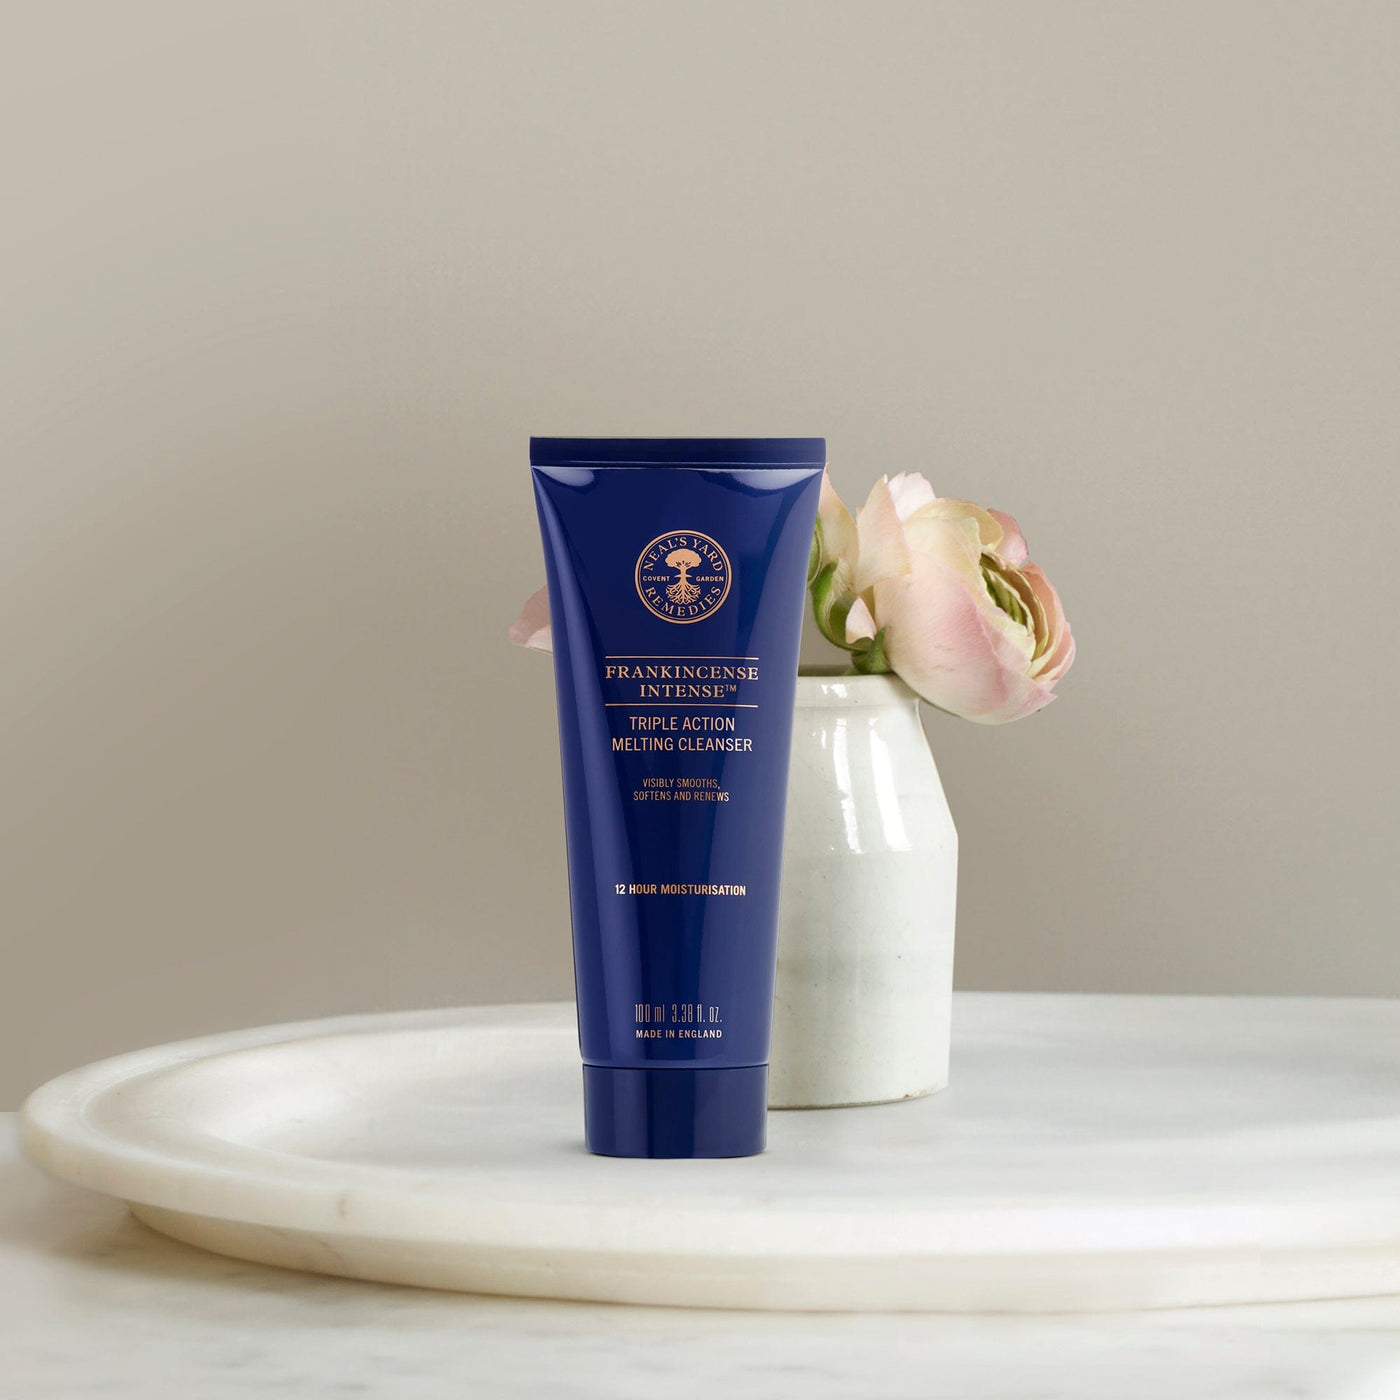 Neal's Yard Remedies Skincare Frankincense Intense Triple Action Melting Cleanser 3.38 fl.oz